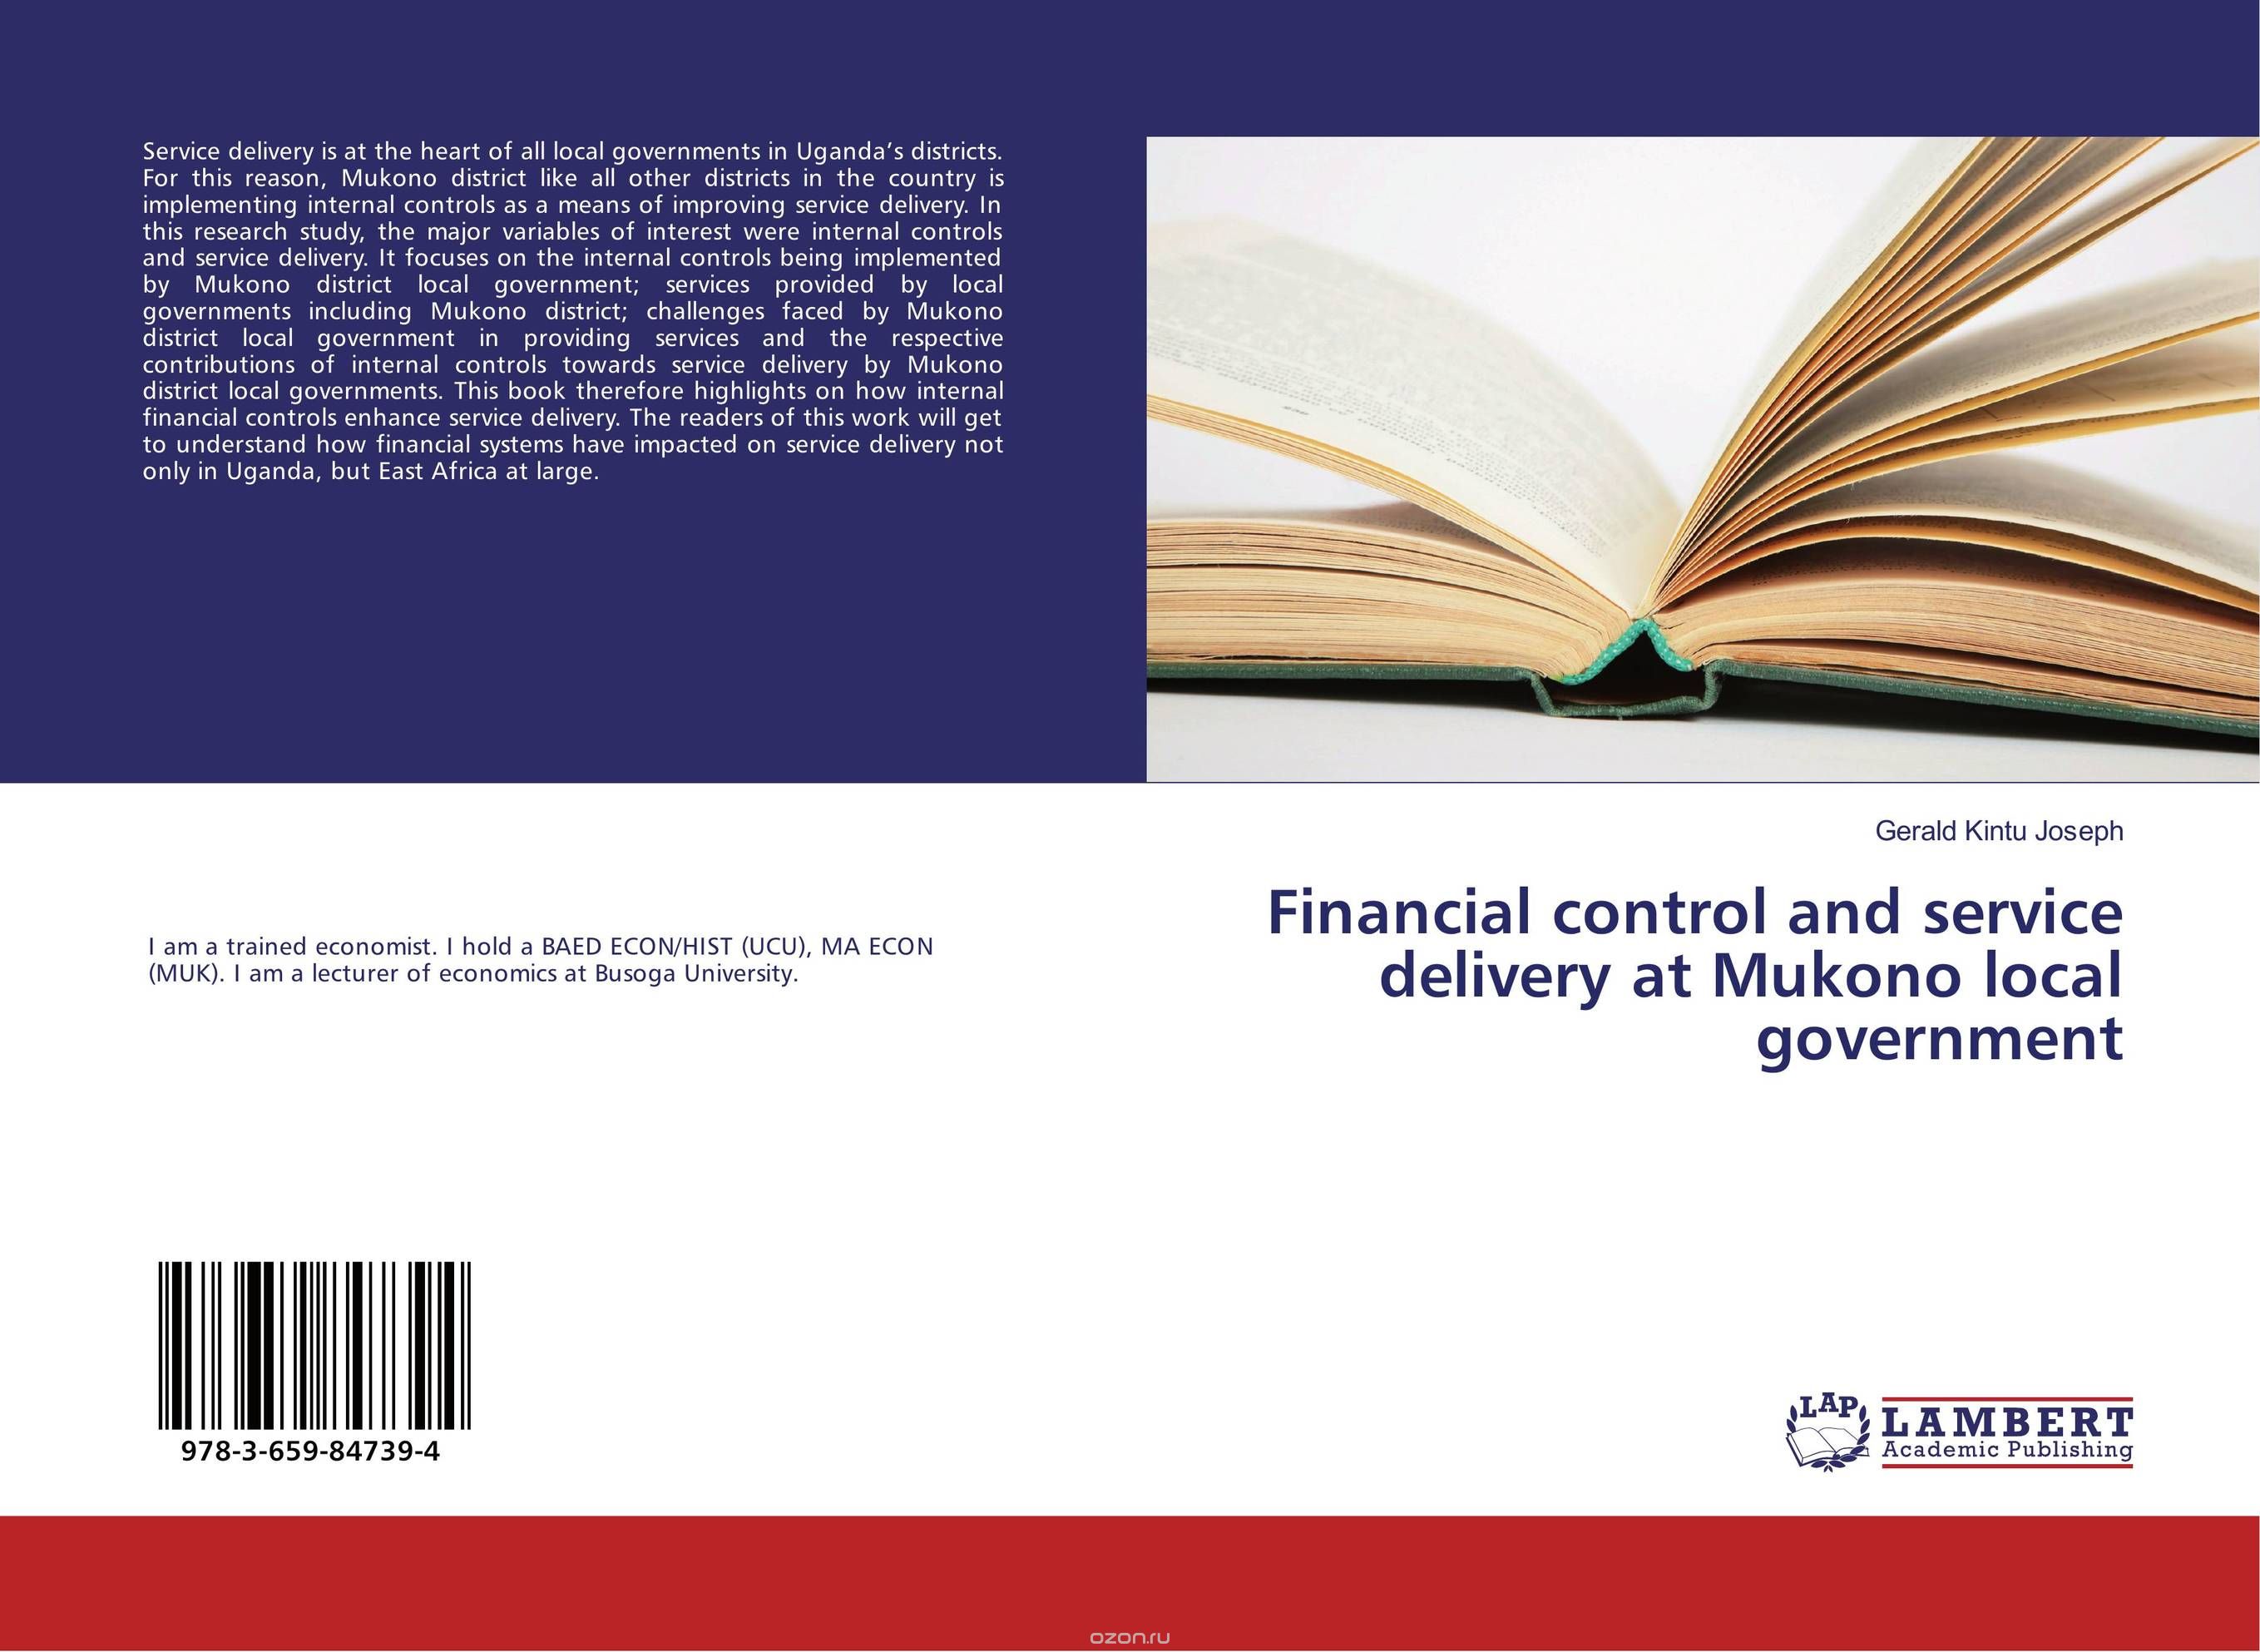 Financial control and service delivery at Mukono local government